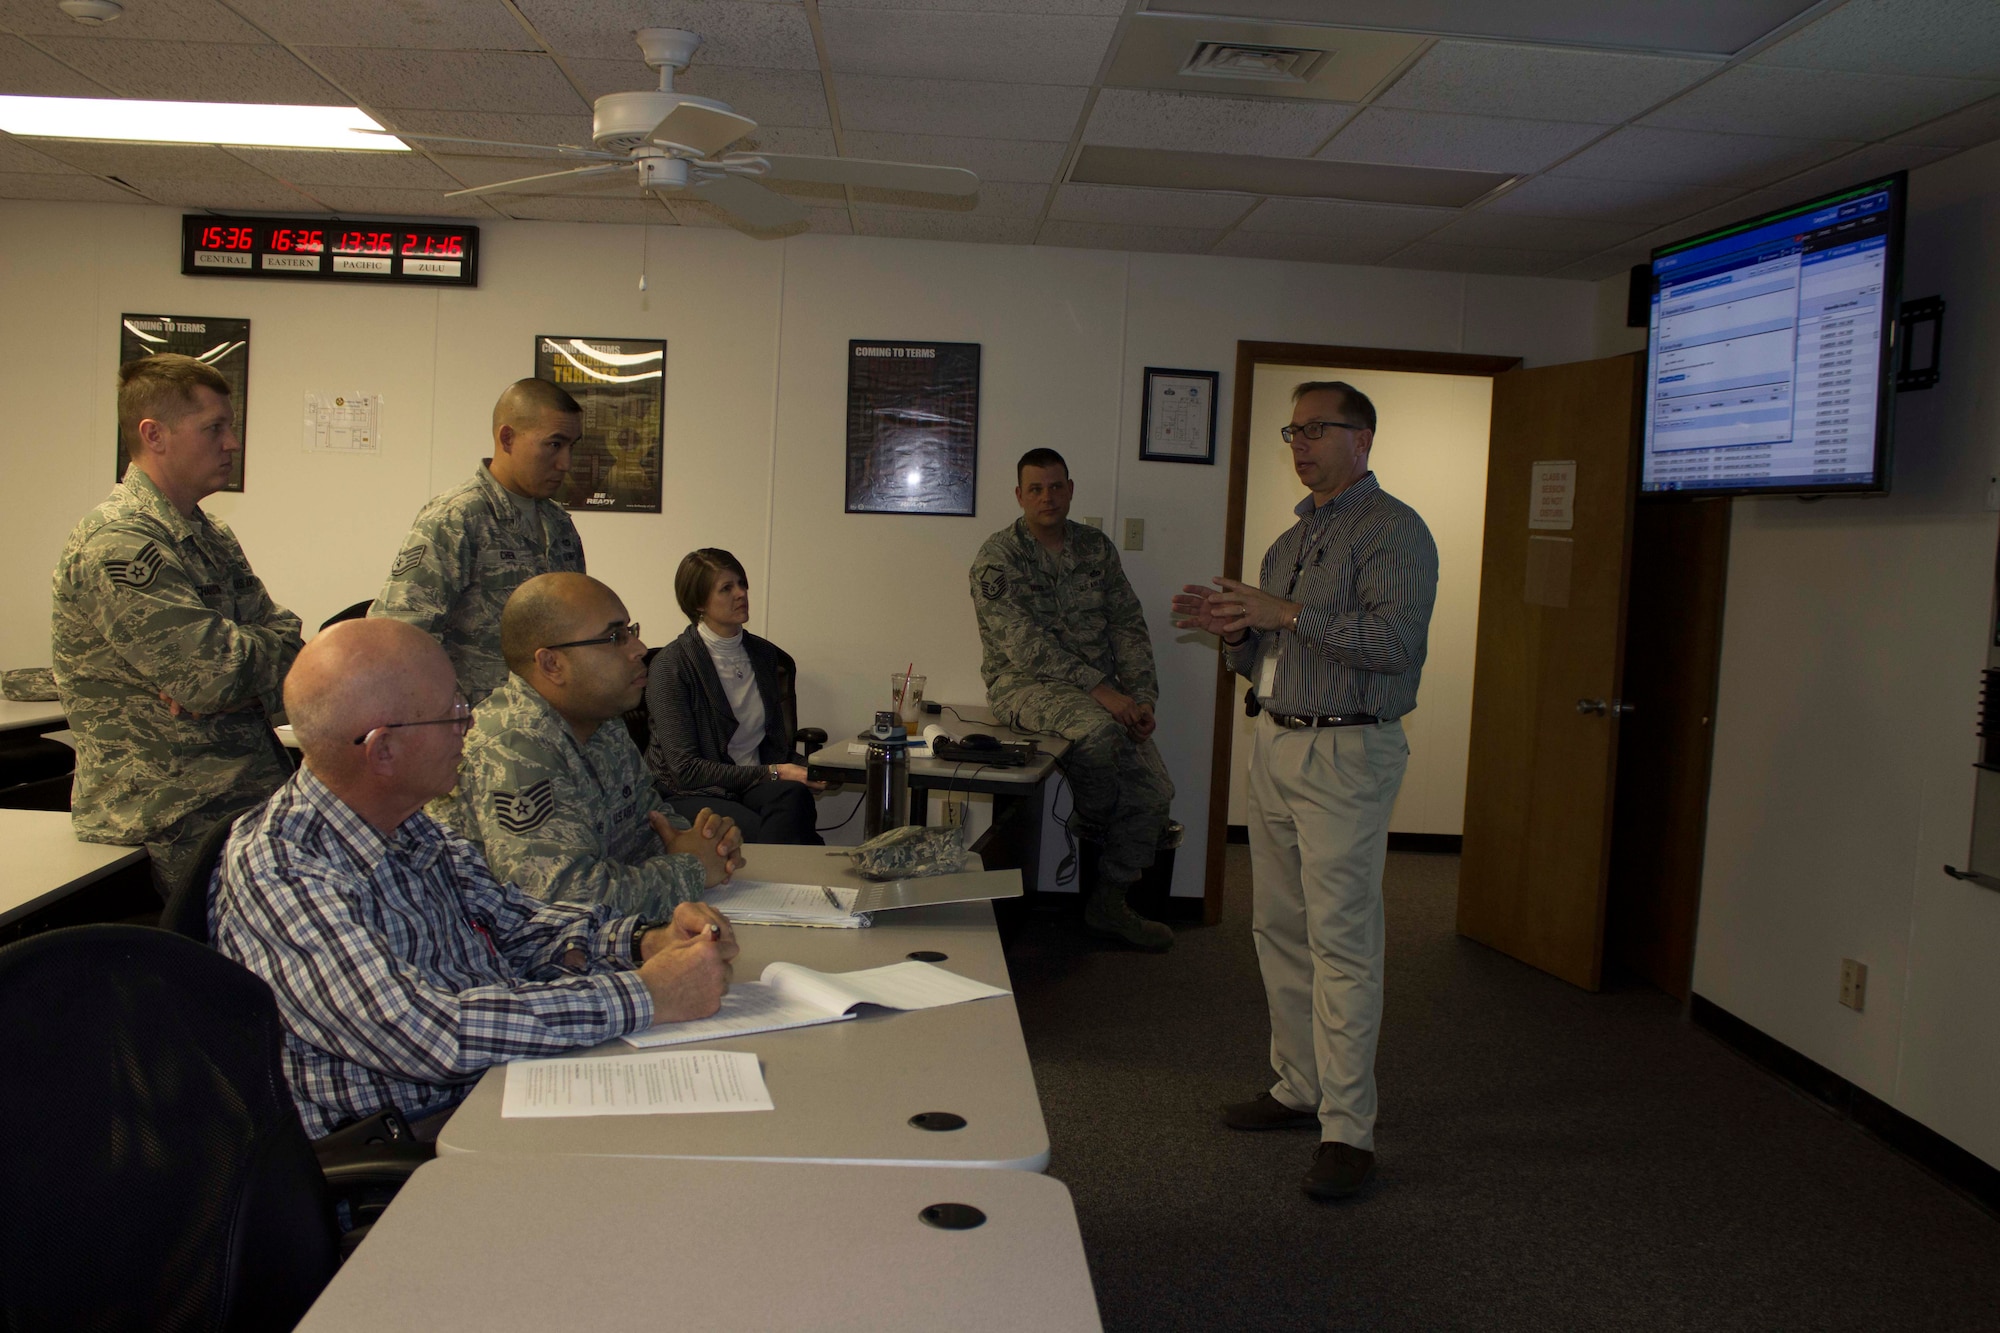 Gary Gentz, preventive maintenance program manager for the Air Force Civil Engineer Center Operations Maintenance Division at Tyndall Air Force Base, Florida, discusses business process scheduling with base personnel during business process review training during a March 2016 visit to Scott Air Force Base, Illinois. The goal of the visit was to inform operations flight personnel of the organization and business process changes required to prepare for the NexGenIT initial operating capability. (Air Force Photo/Susan Lawson/Released)